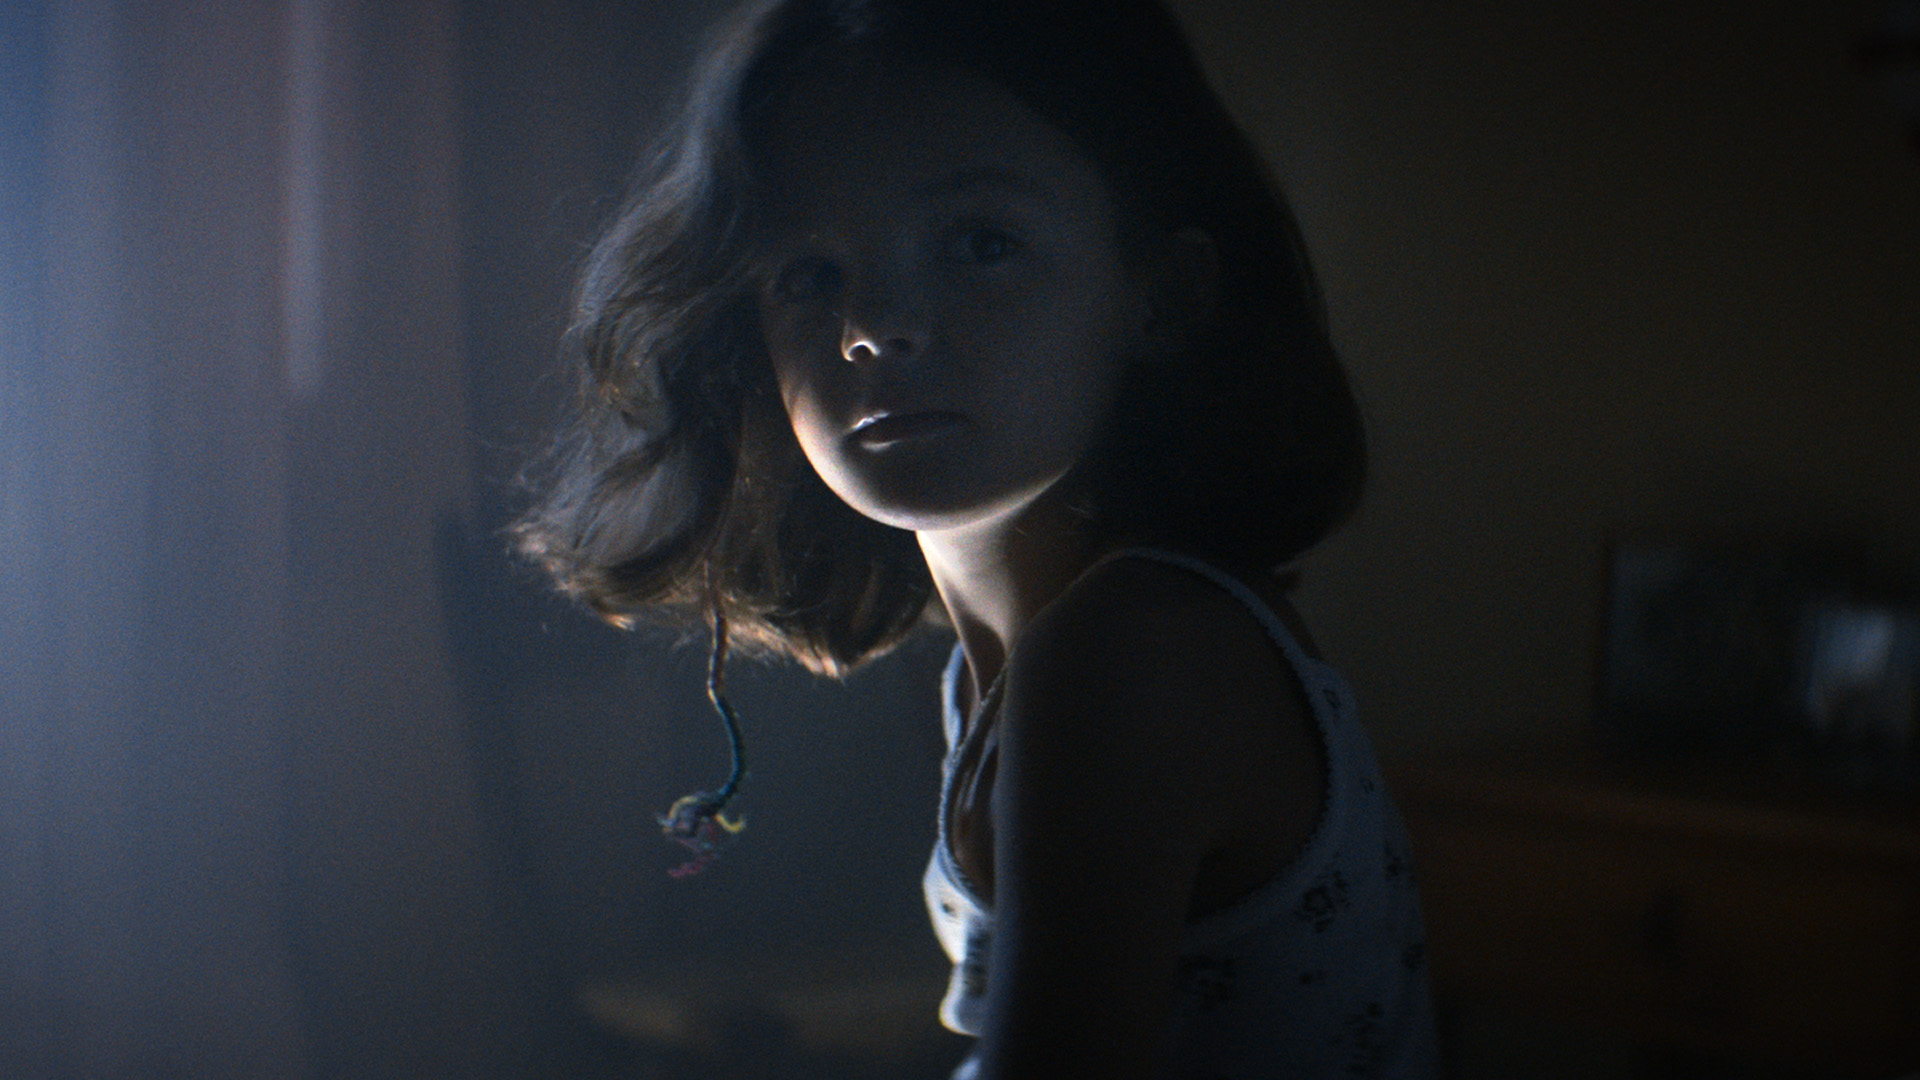 A frame of the film 'Creatura', directed by Elena Martín